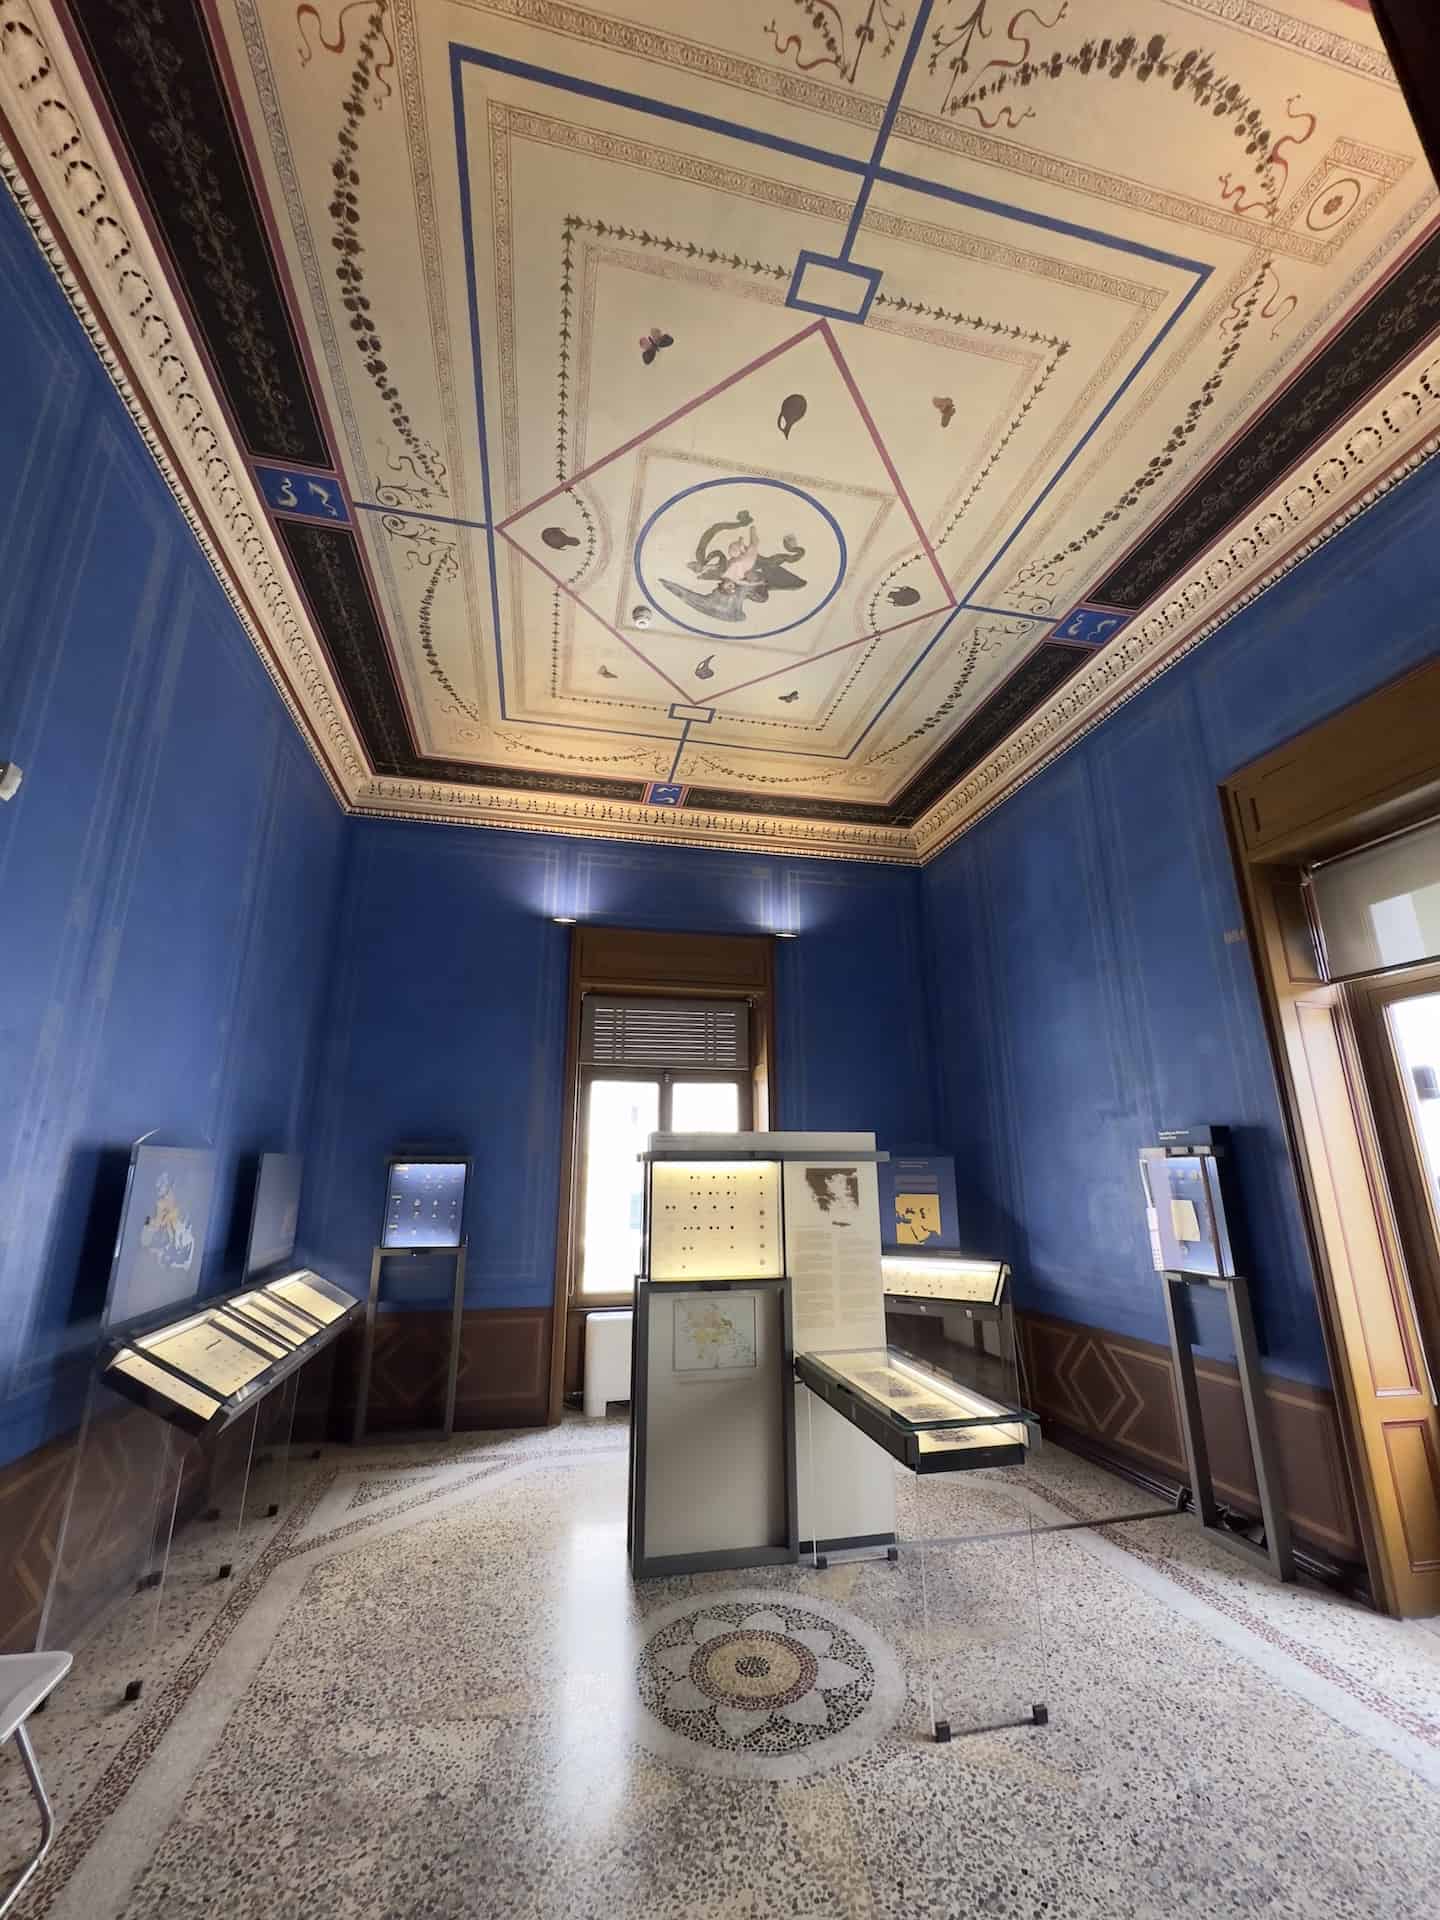 Room on the second floor of the Numismatic Museum at the Iliou Melathron in Athens, Greece